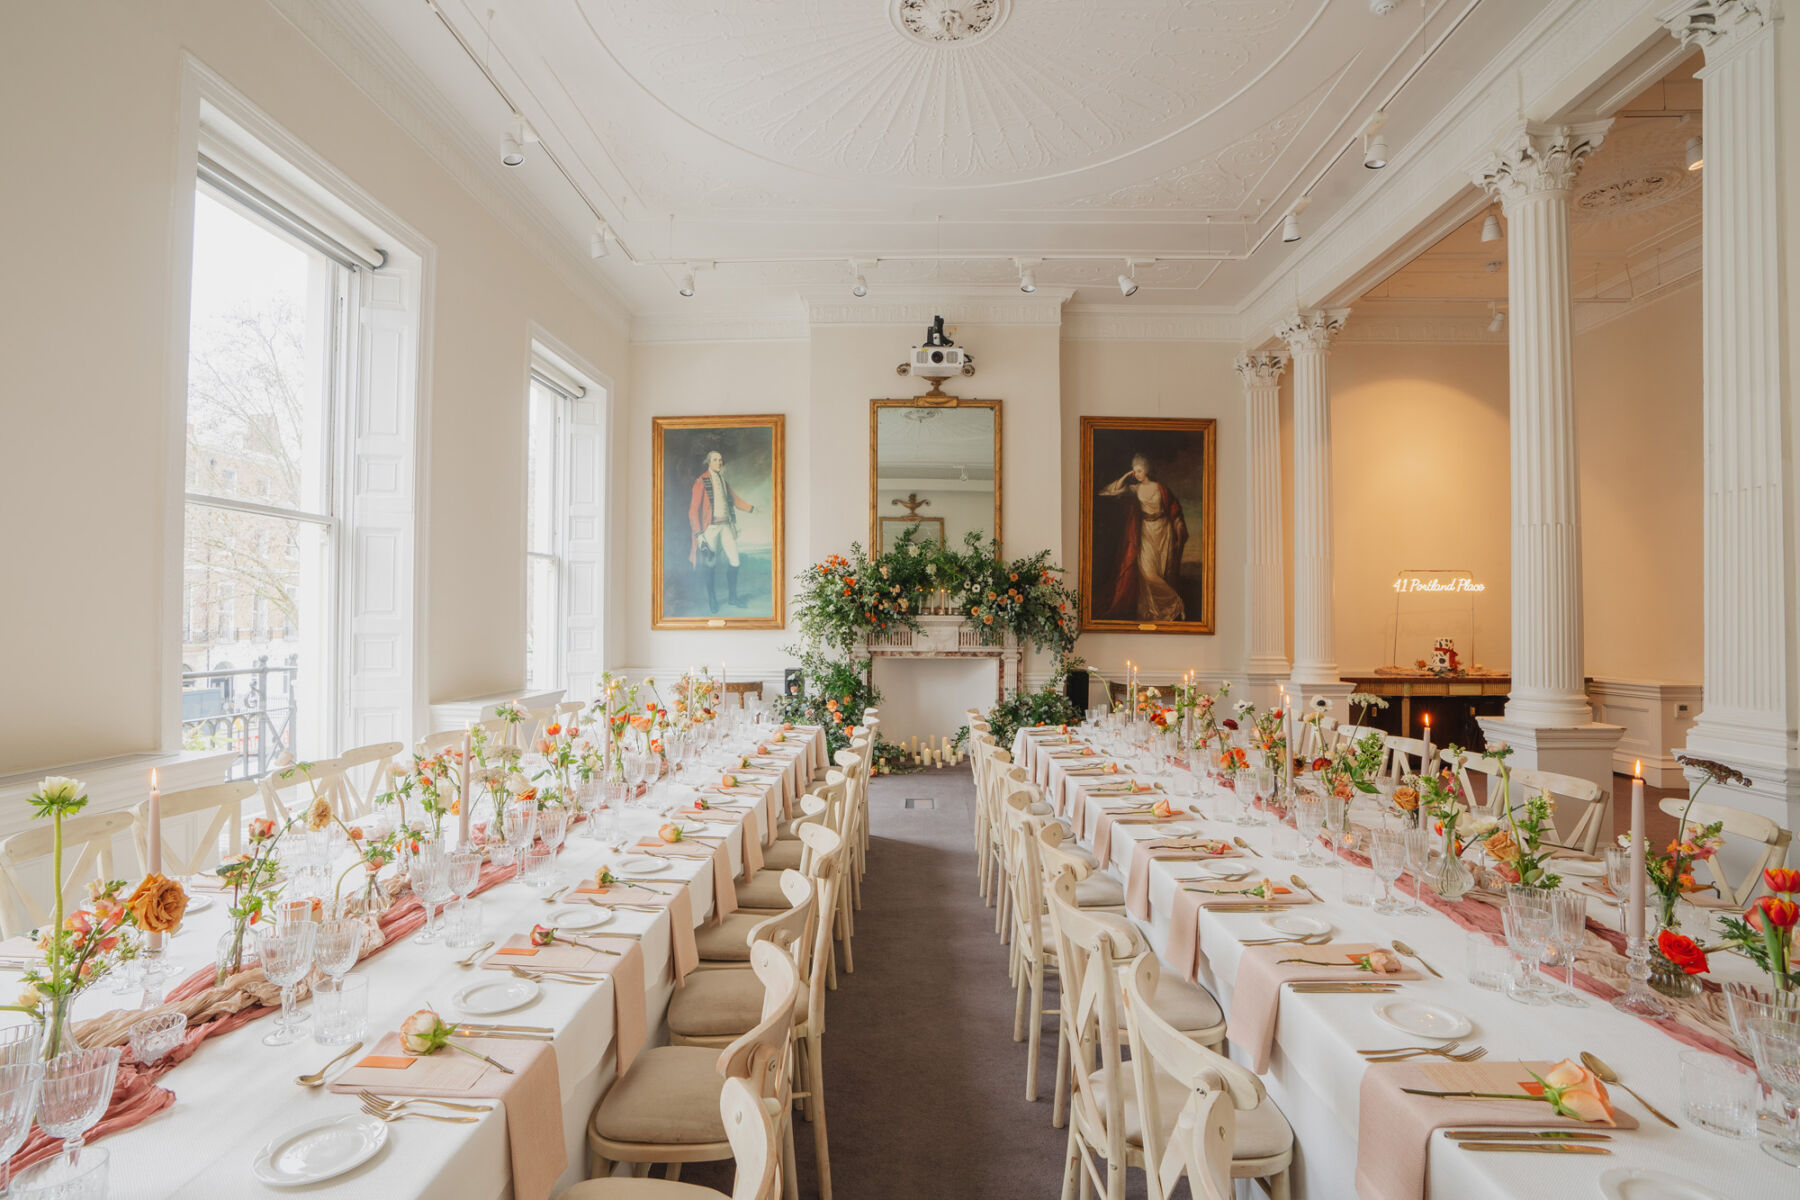 Light, bright and airy wedding reception room at 41 Portland Place London, decorated in burnt orange flowers and table decor.